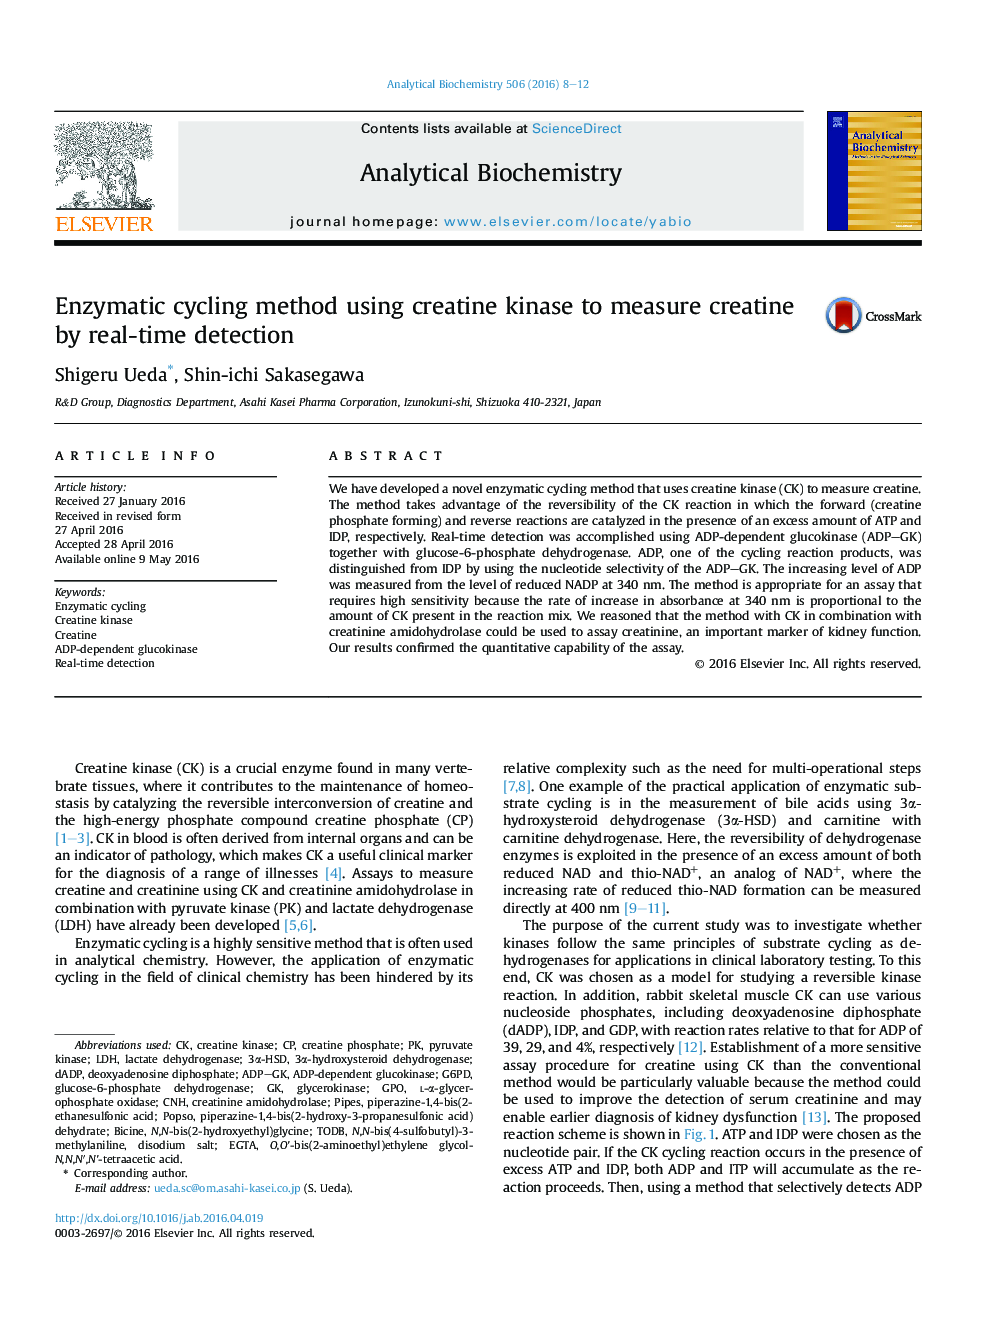 Enzymatic cycling method using creatine kinase to measure creatine by real-time detection